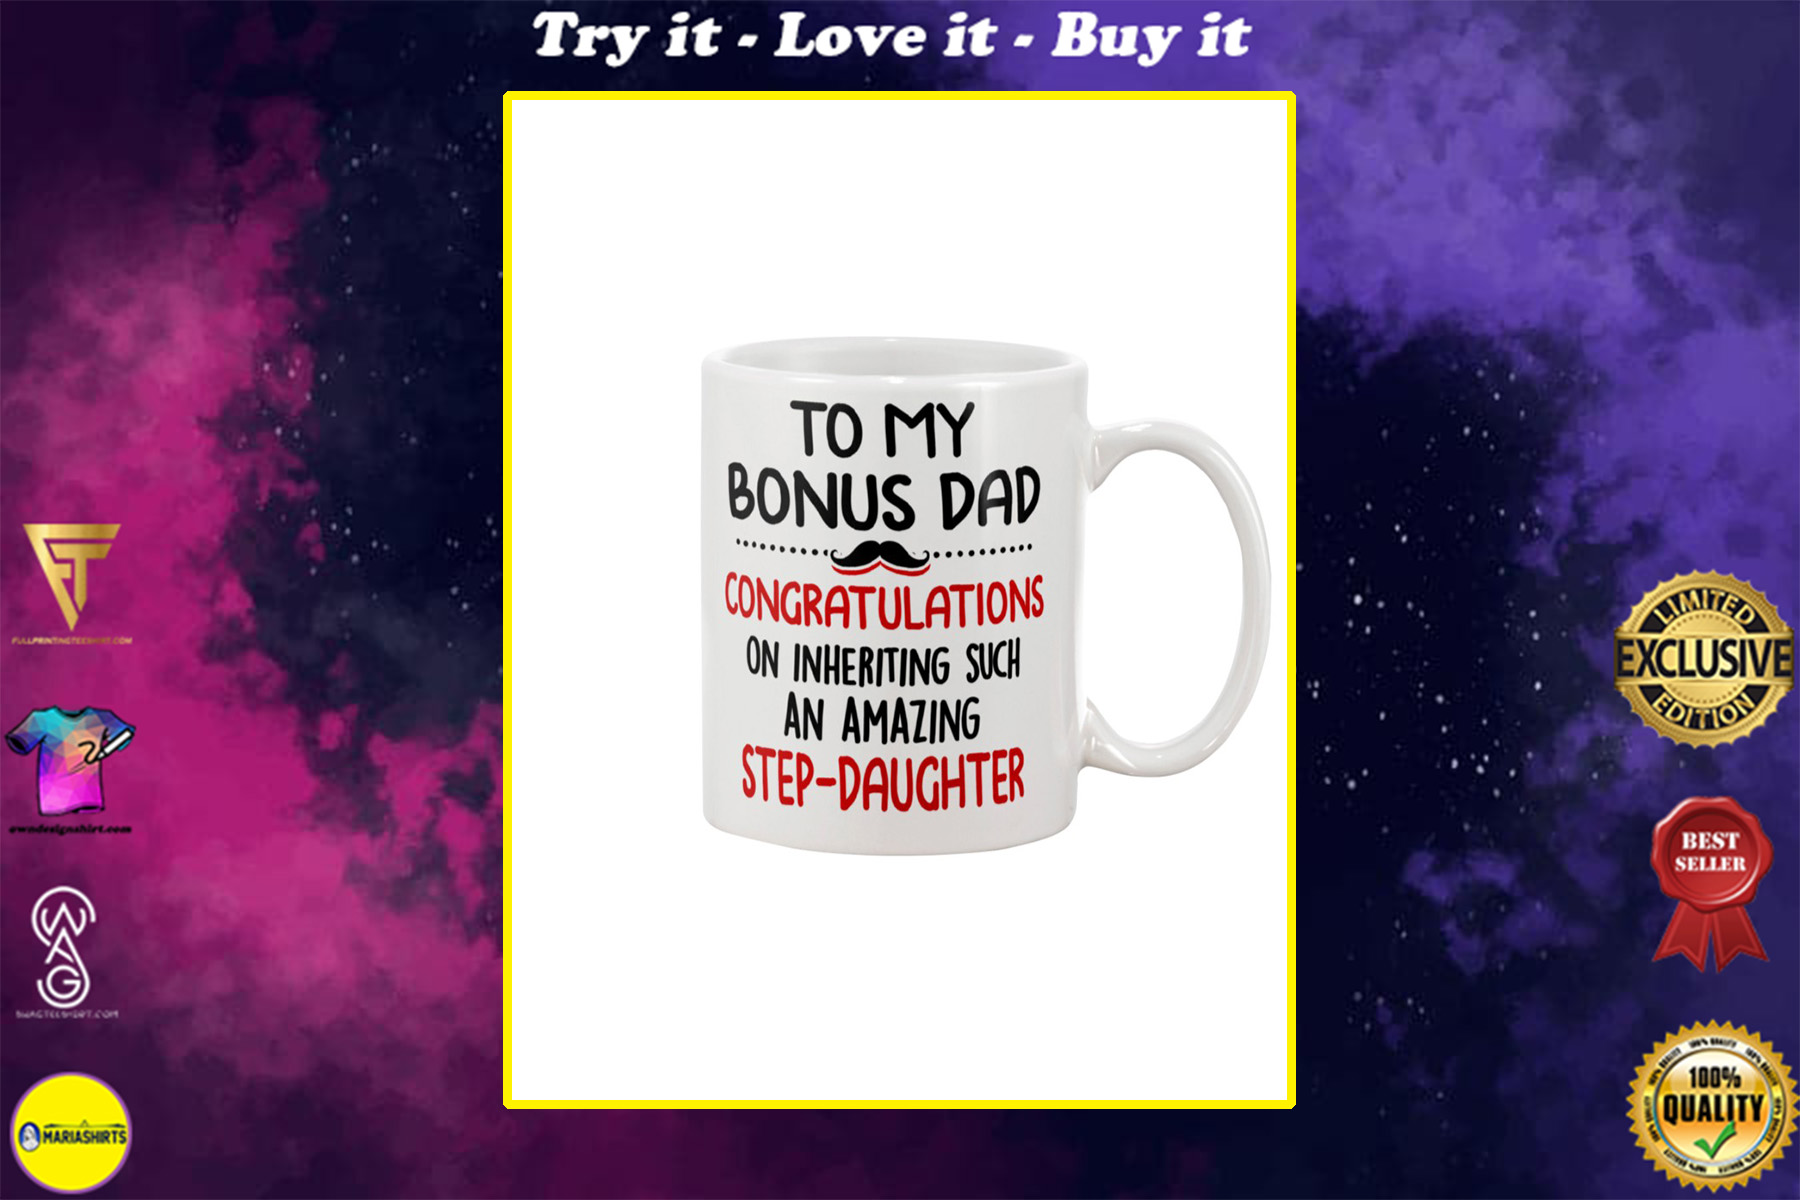 to my bonus dad congratulations on inheriting such an amazing step daughter happy father's day mug